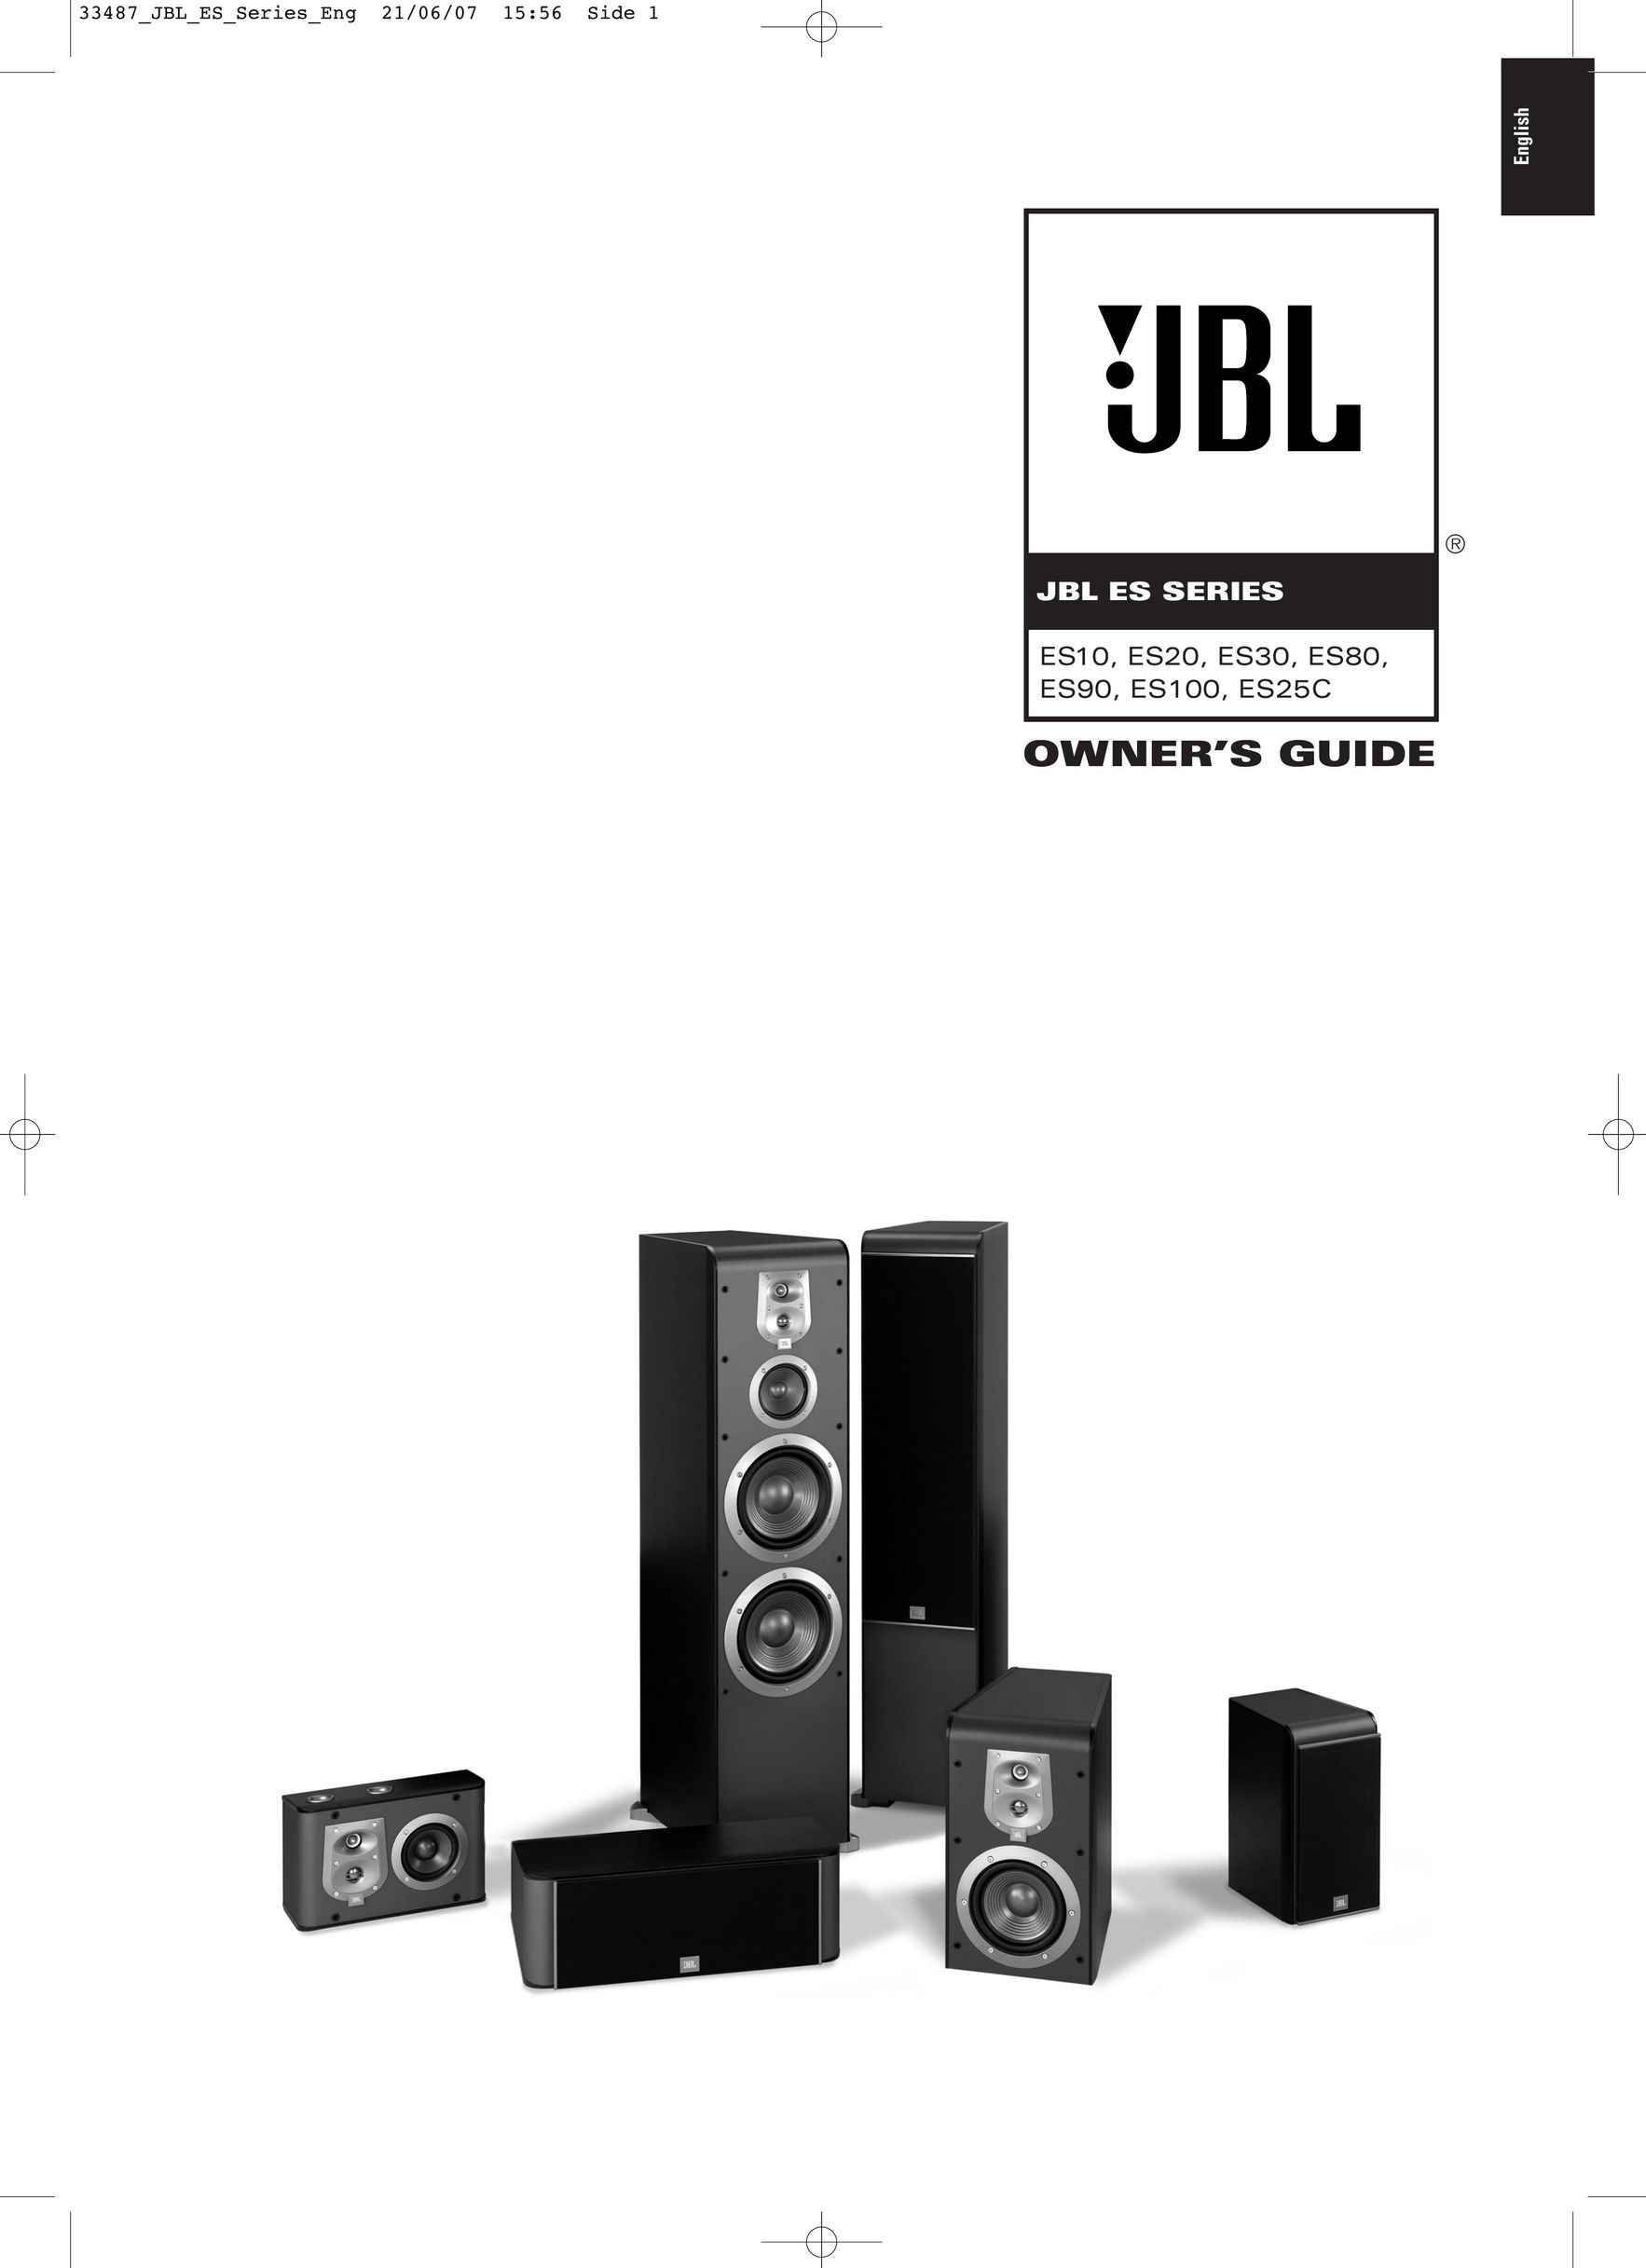 JBL ES10 Home Theater System User Manual